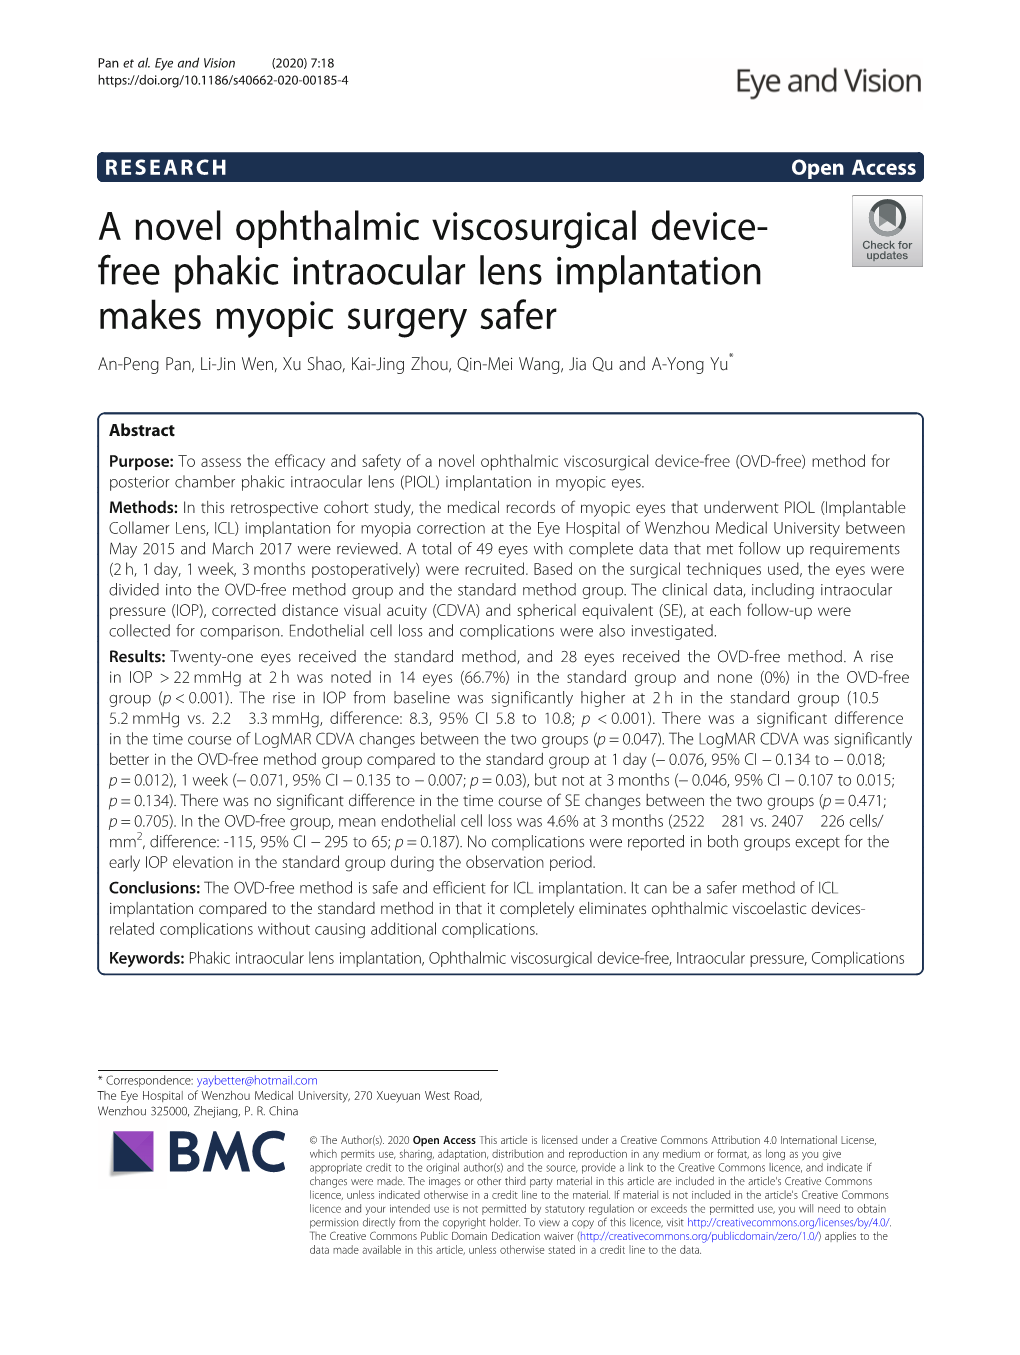 A Novel Ophthalmic Viscosurgical Device-Free Phakic Intraocular Lens Implantation Makes Myopic Surgery Safer